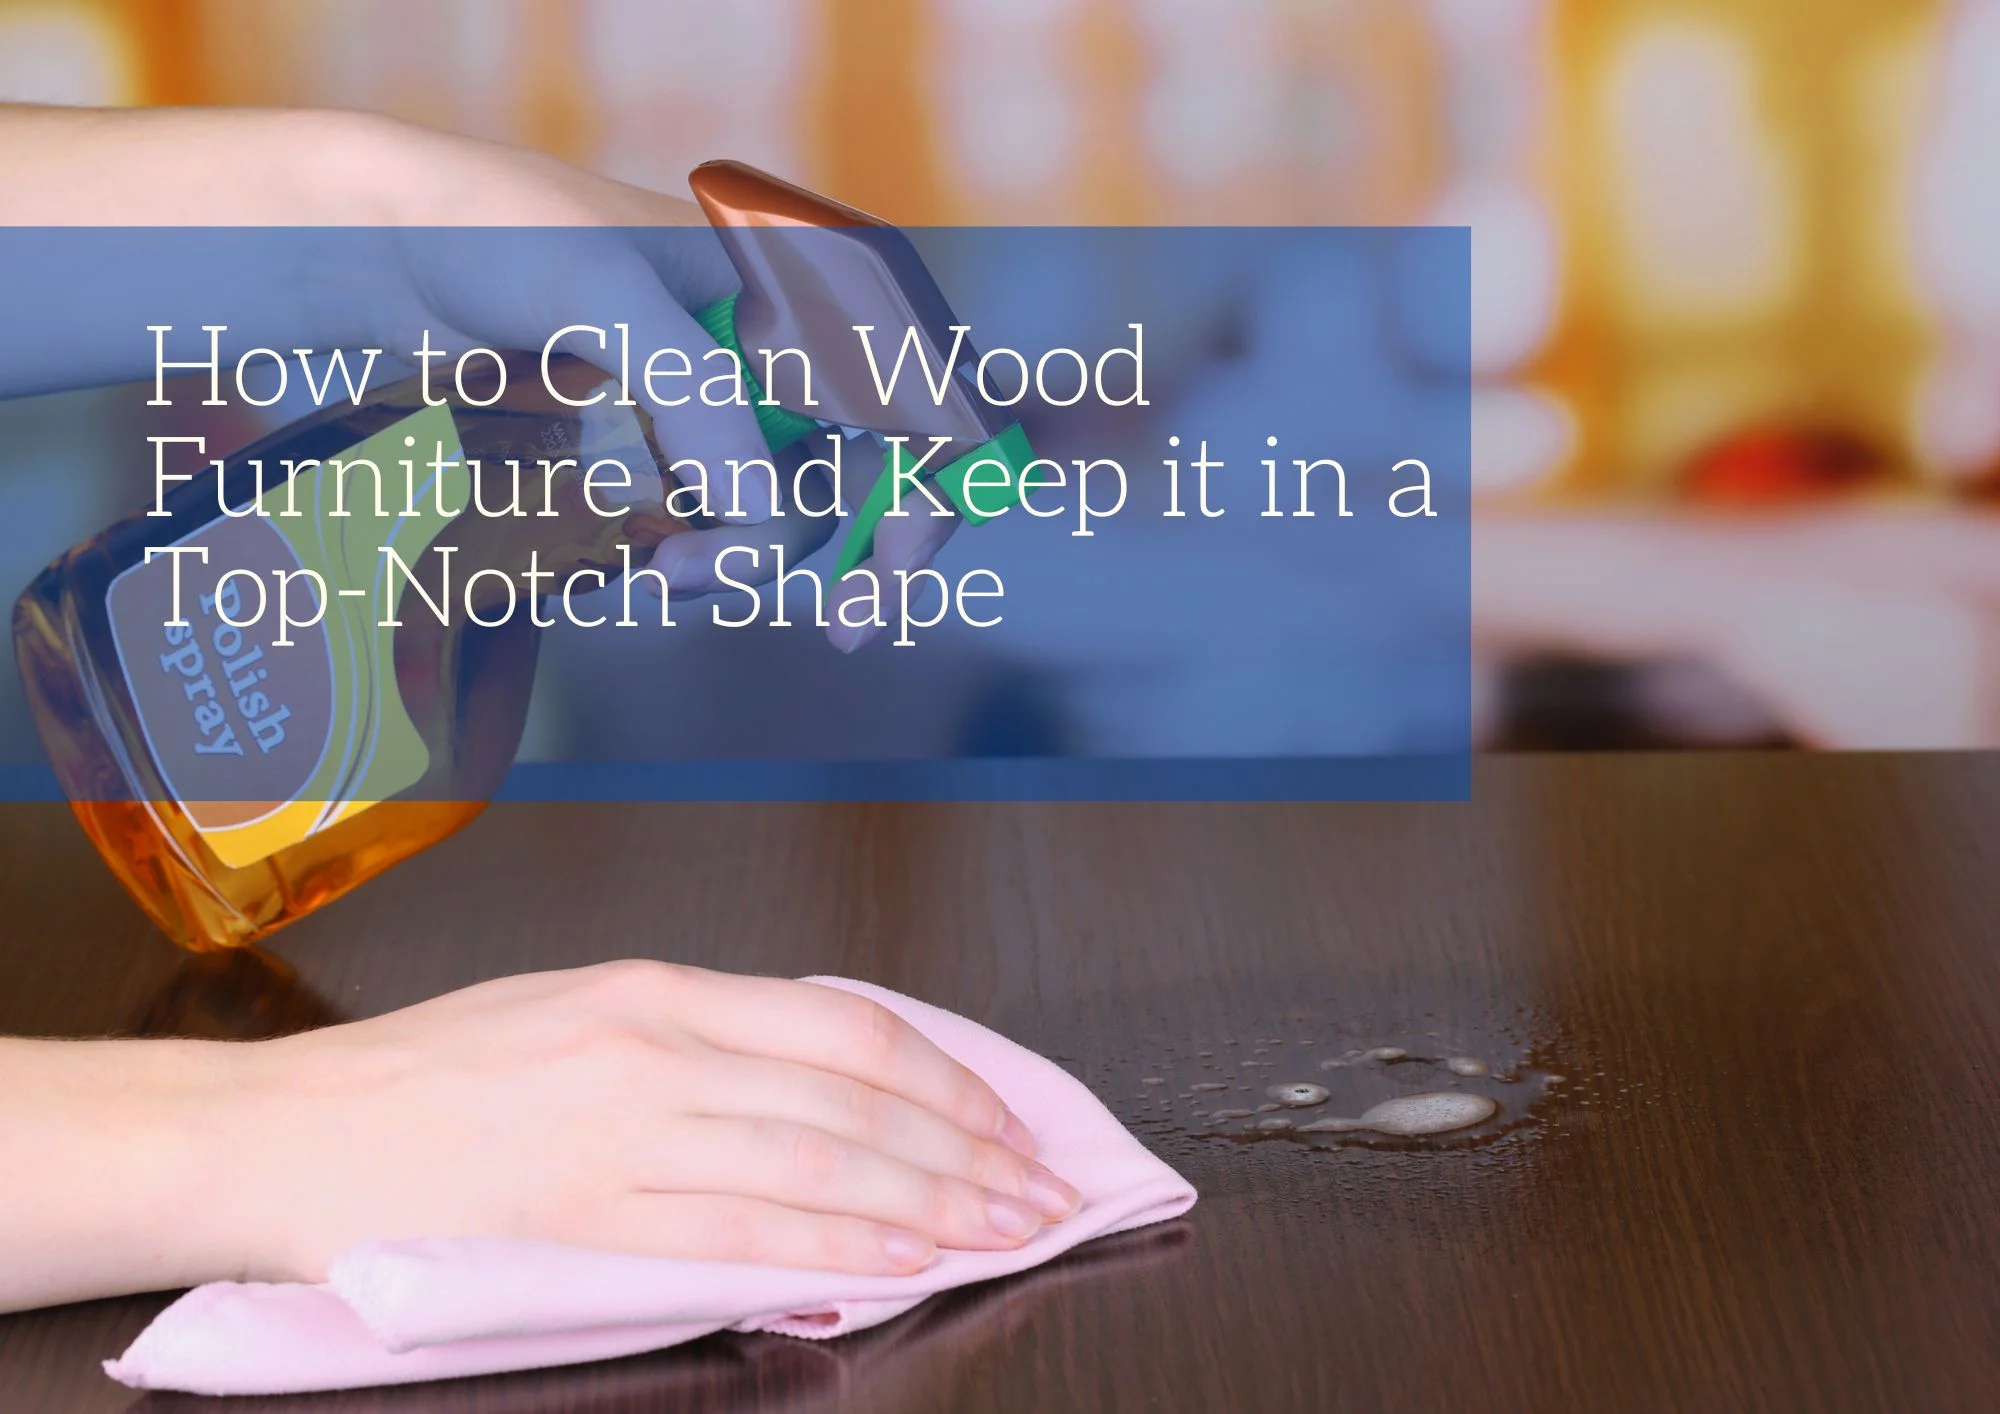 How to Clean Wood Furniture and Keep it in a Top-Notch Shape